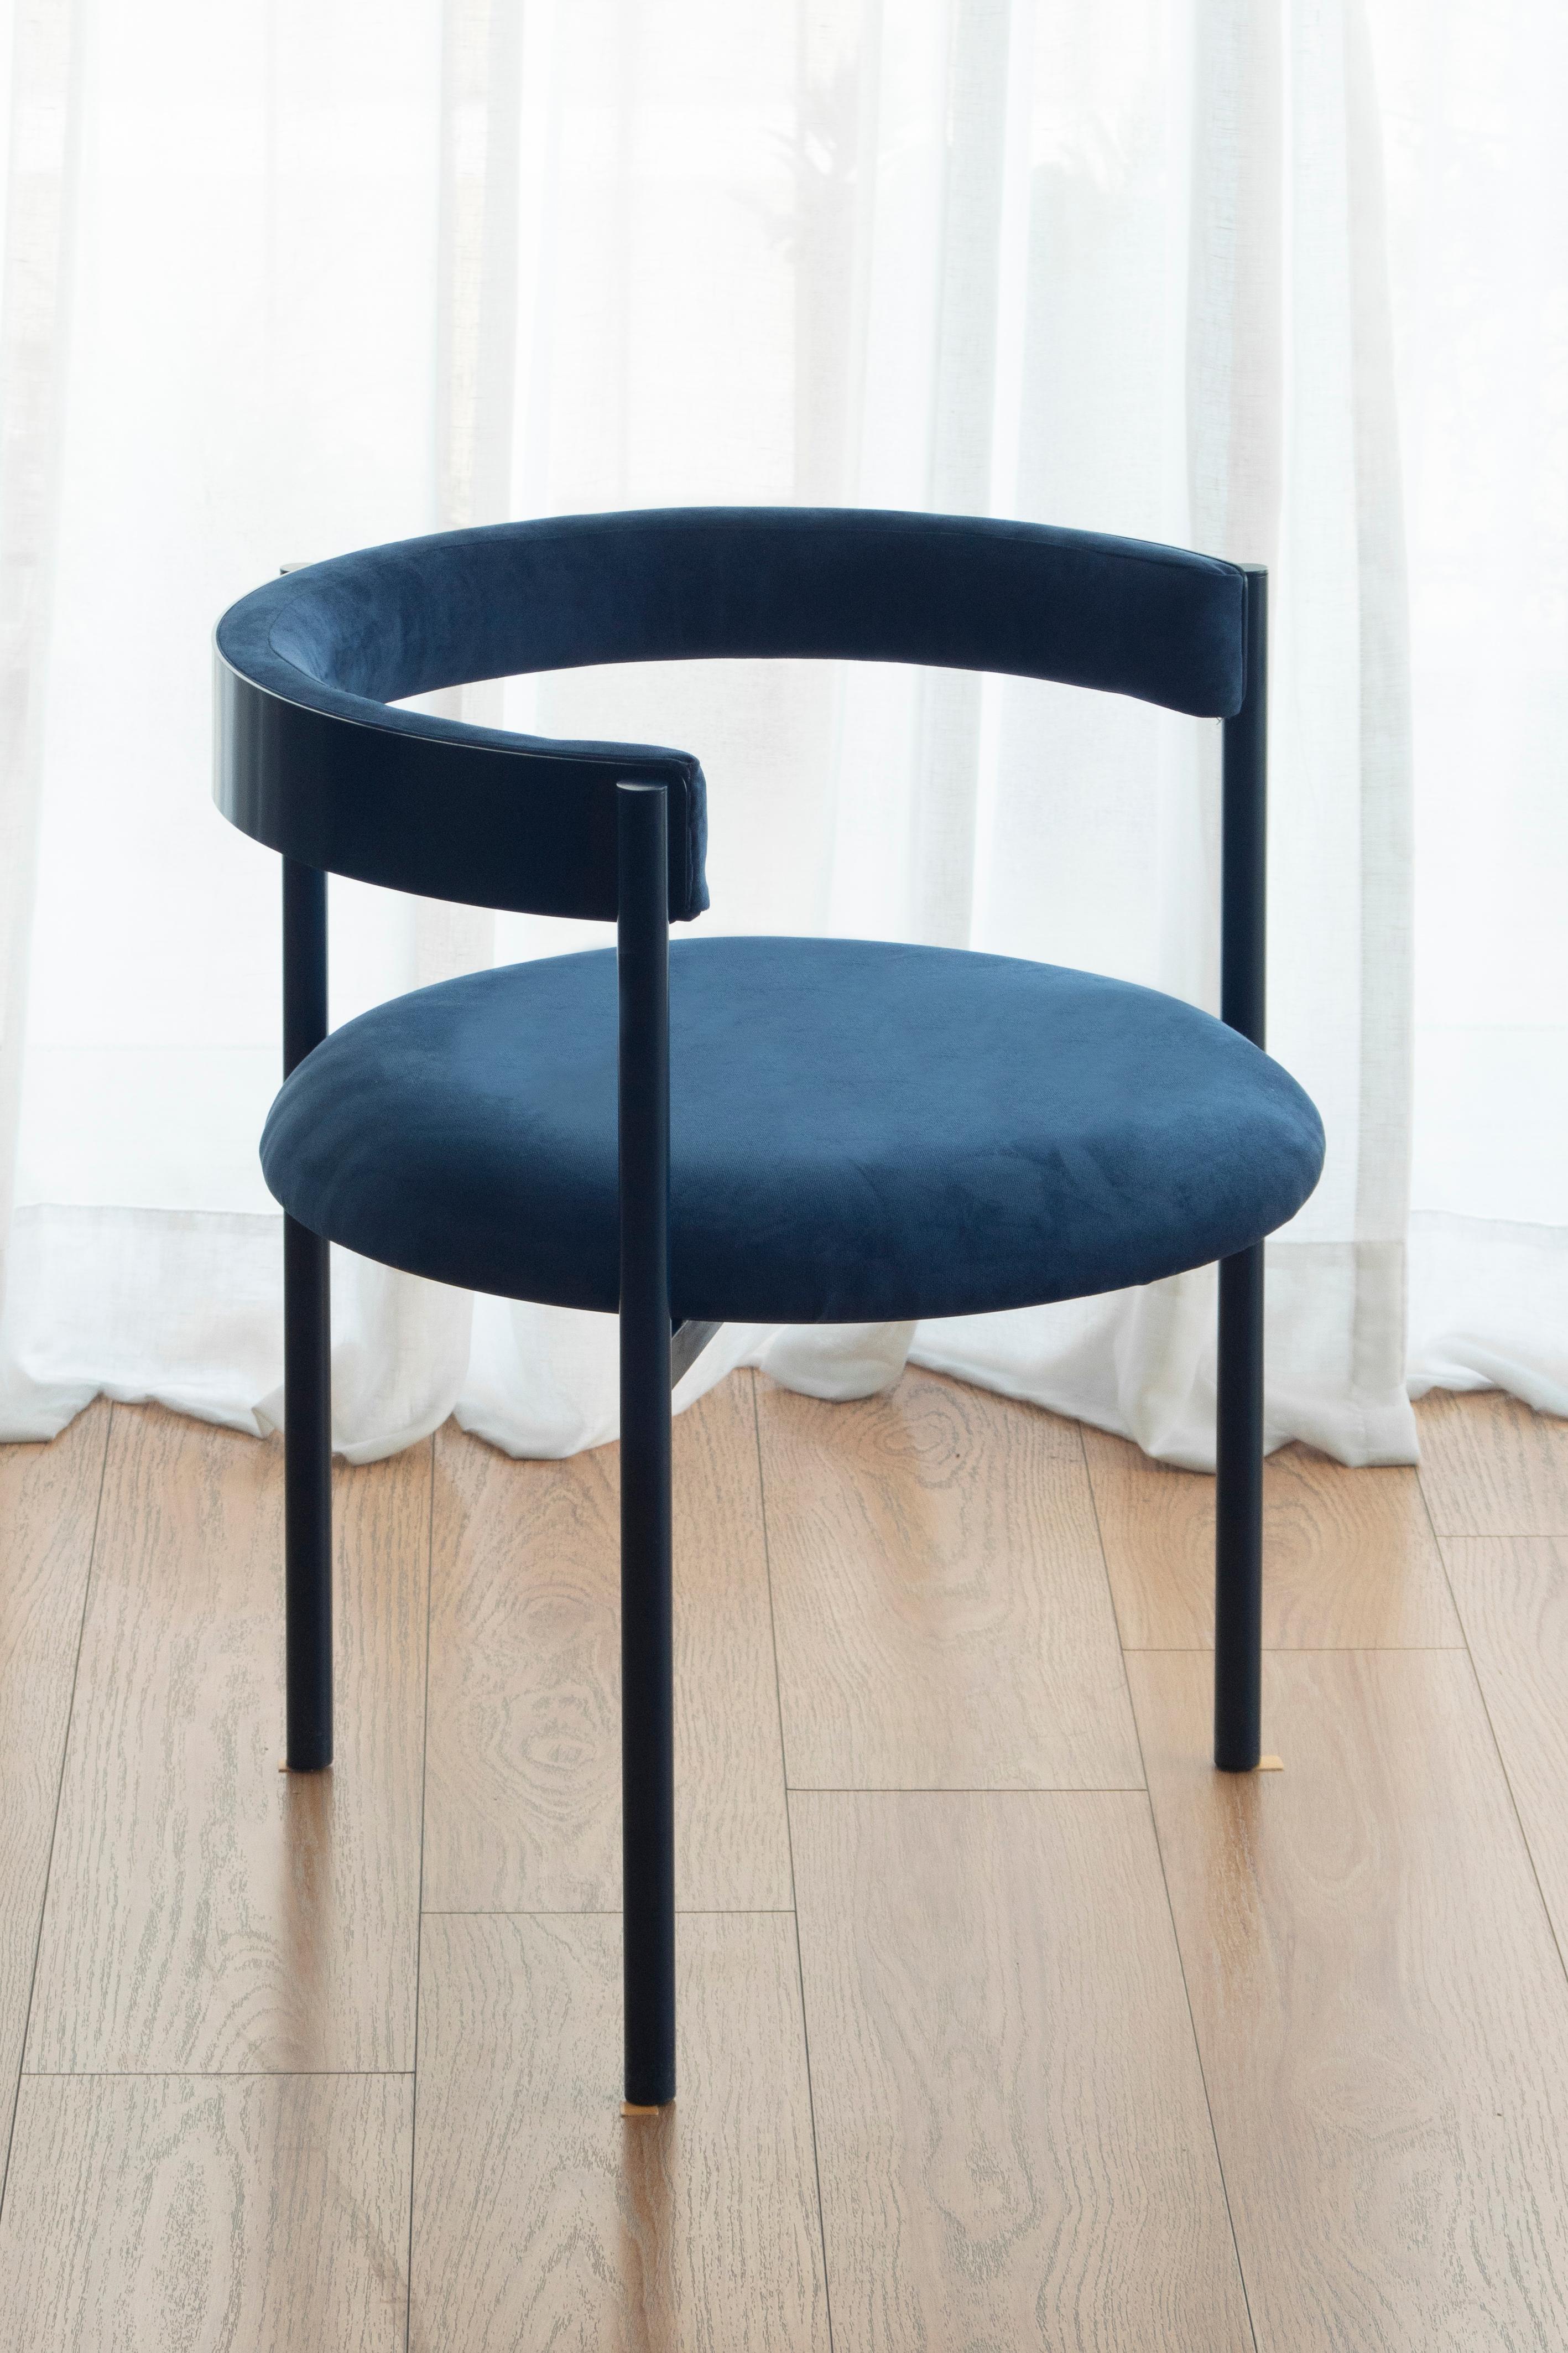 Aro chair, dark blue by Ries
Dimensions: W 60 x D 60 x H 67,5 cm 
Materials: Round steel tube, high-density foam, and velvet upholstery

Also available: Merlot, black, mika, oceano, pink and yellow.

Ries is a design studio based in Buenos